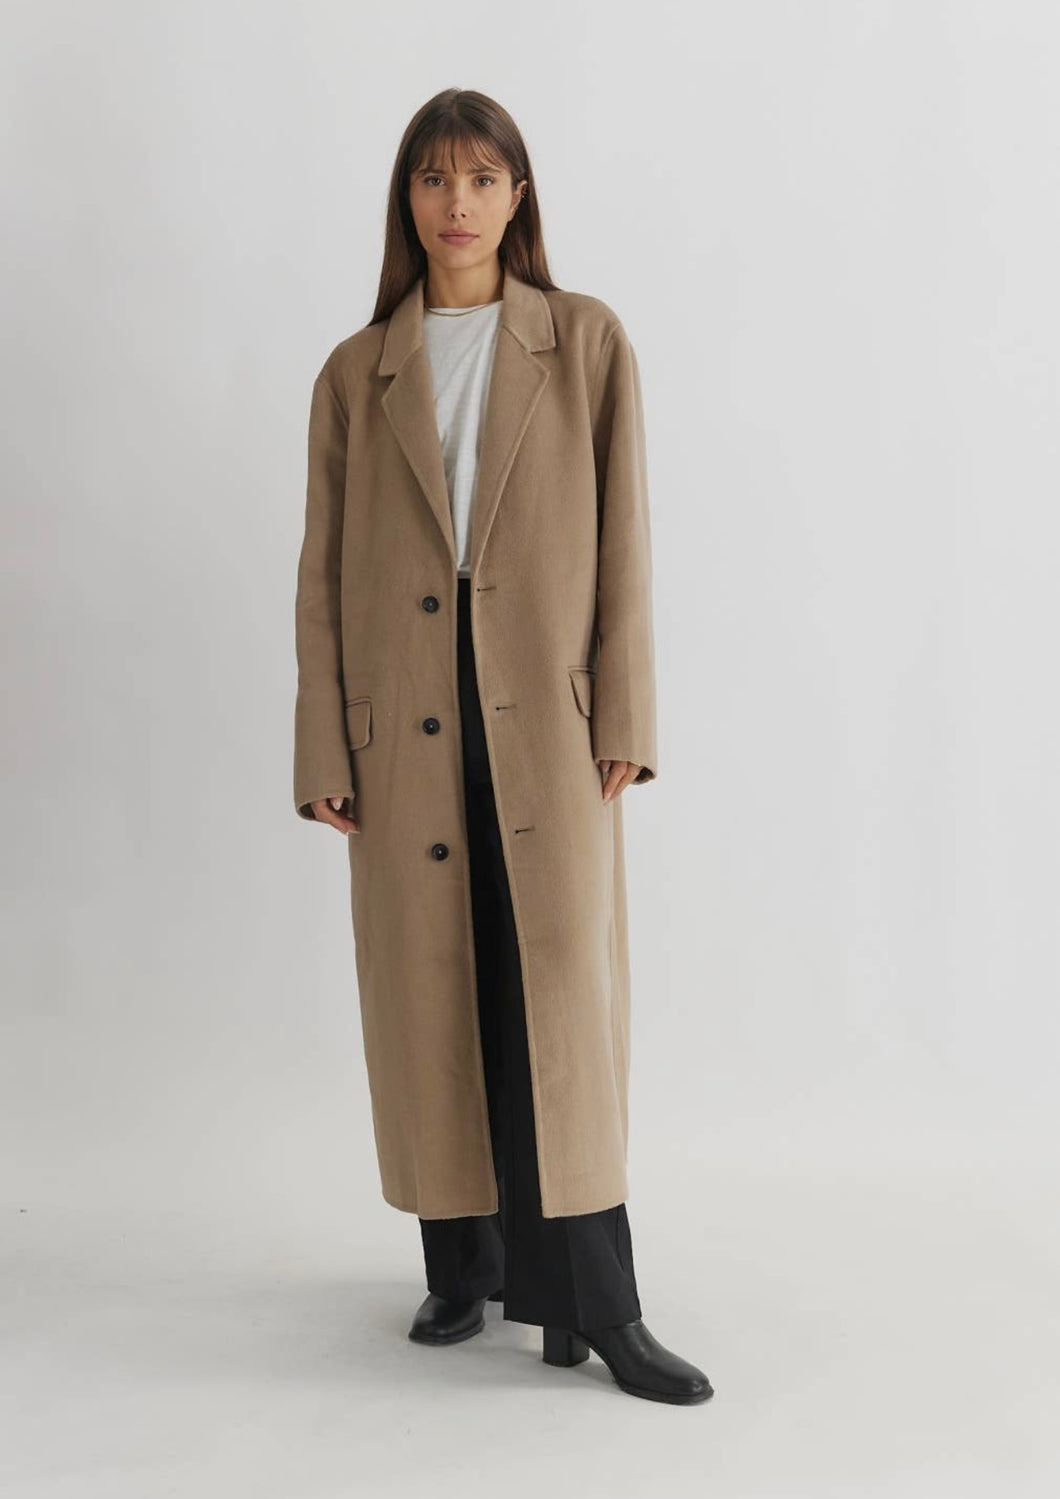 The Spence Coat